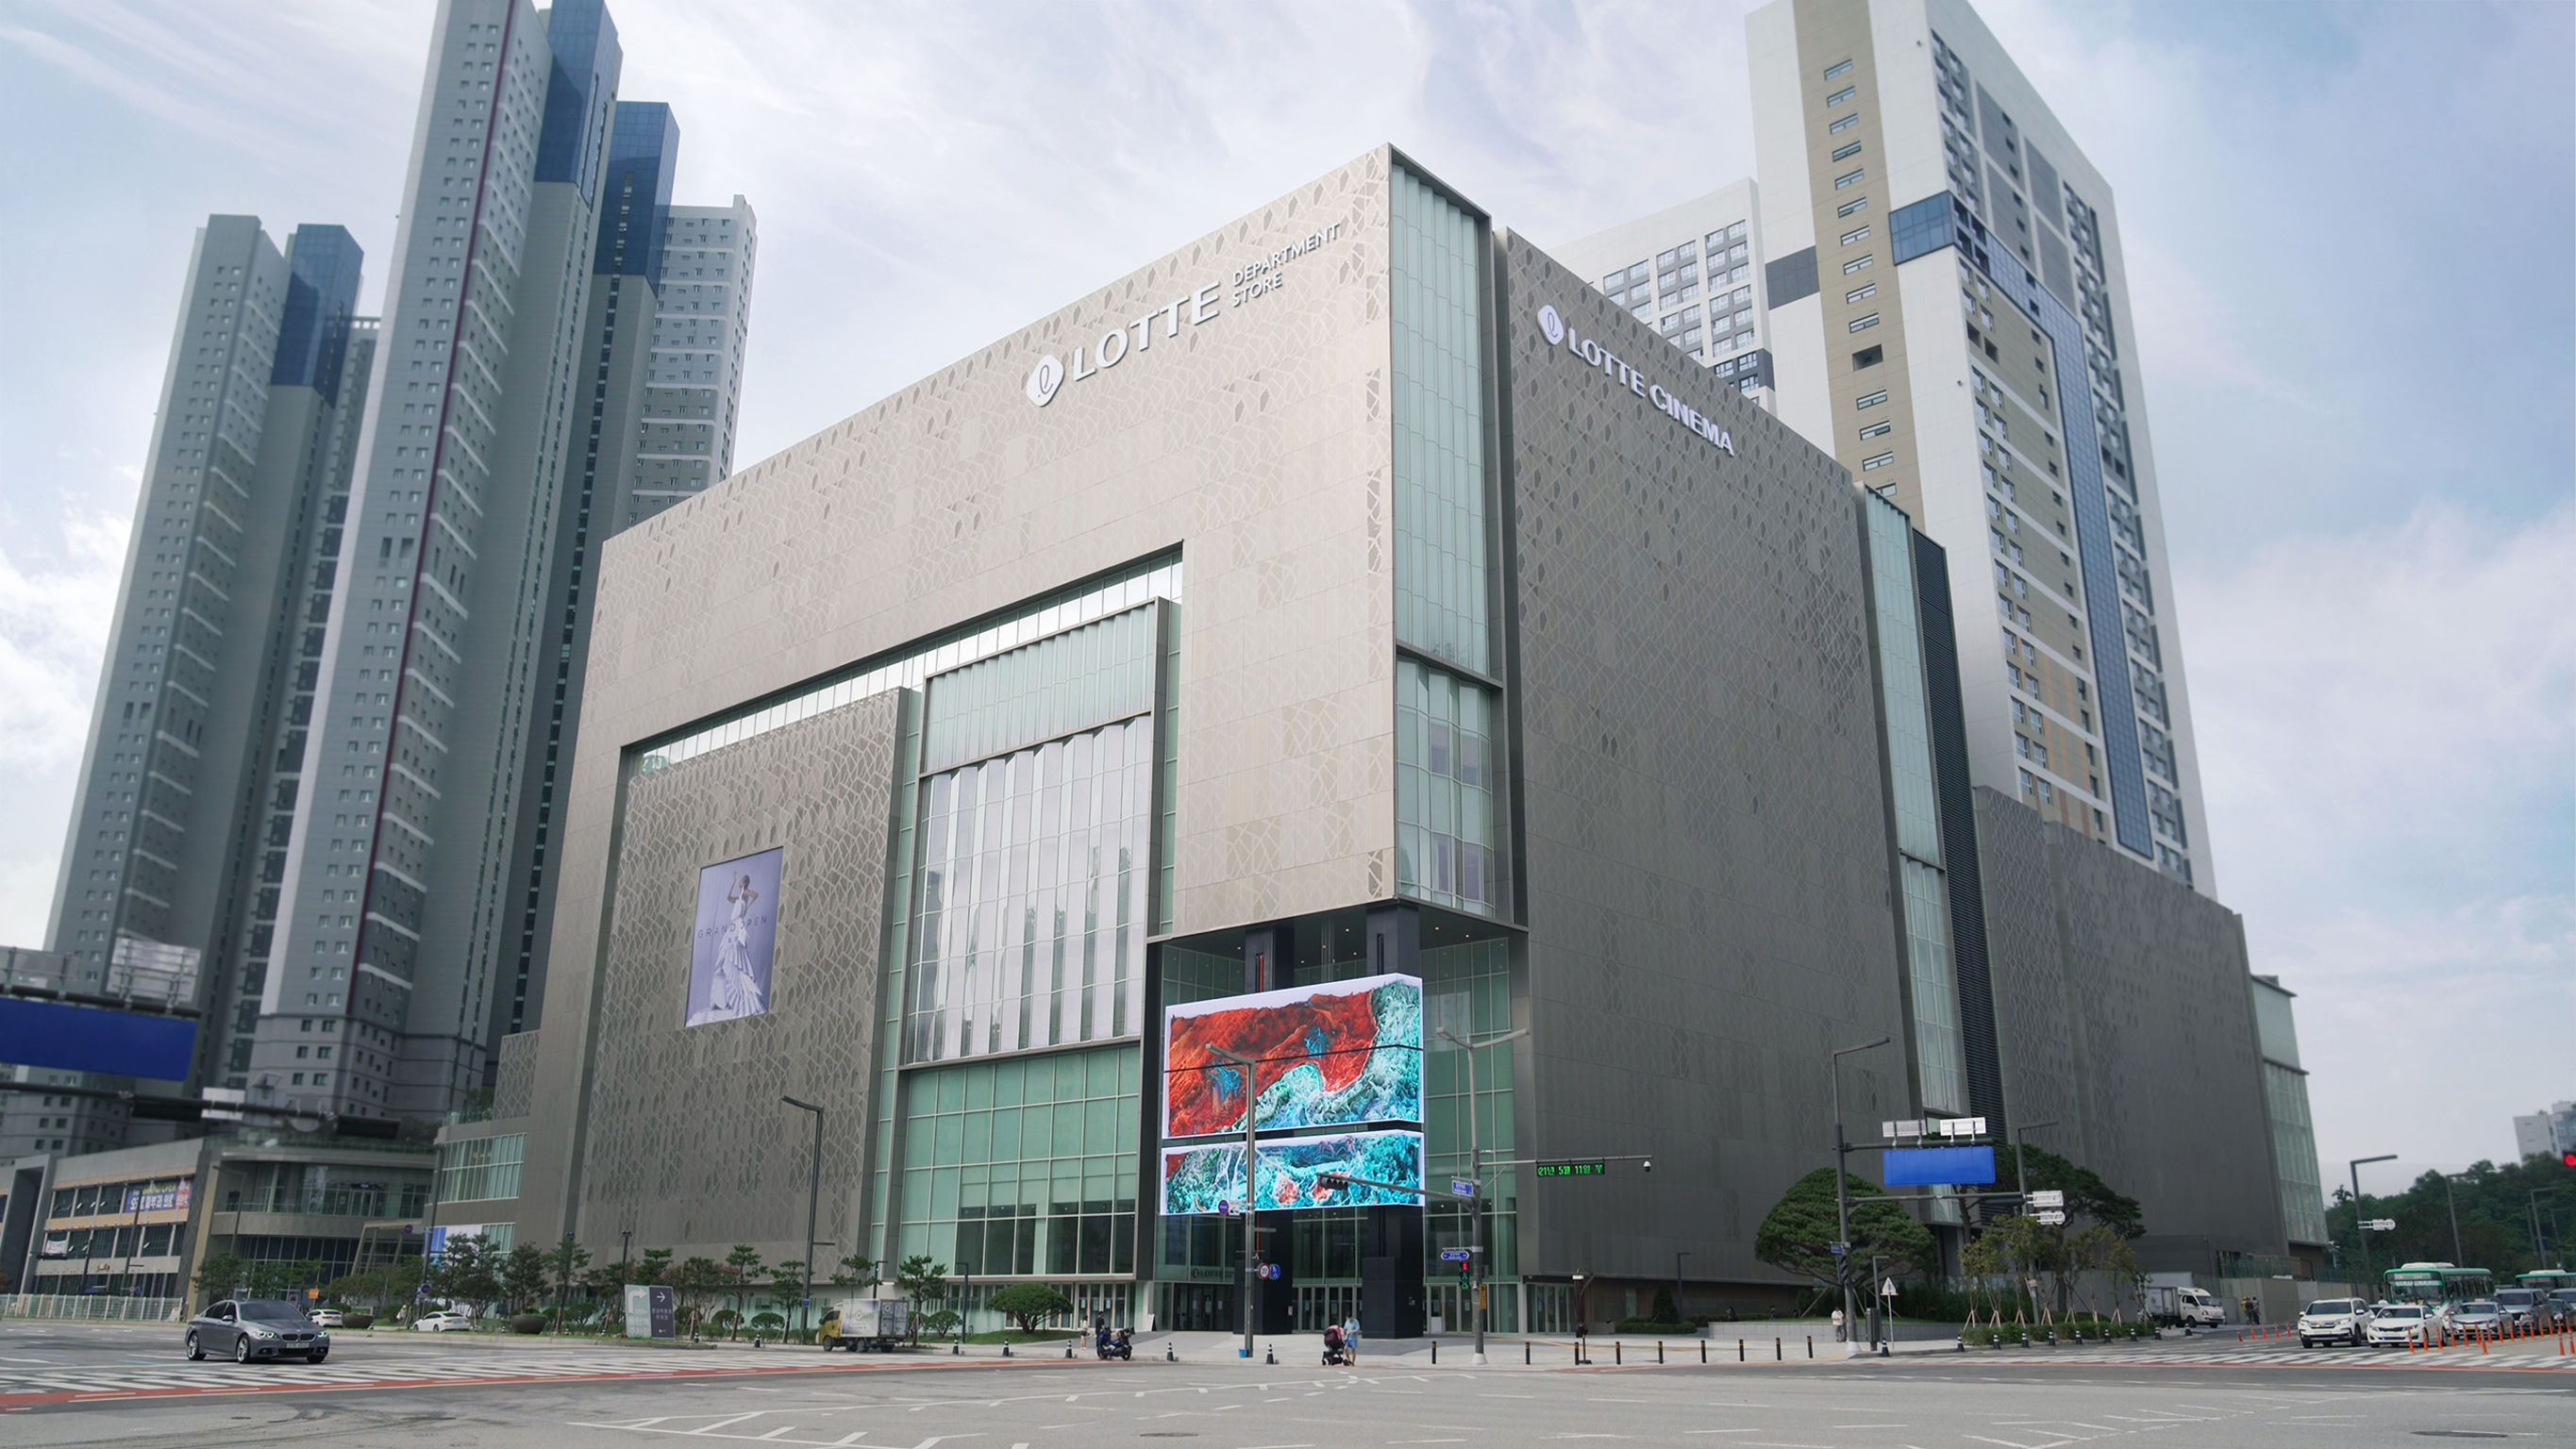 Lotte department store, Dongtan. Media monument